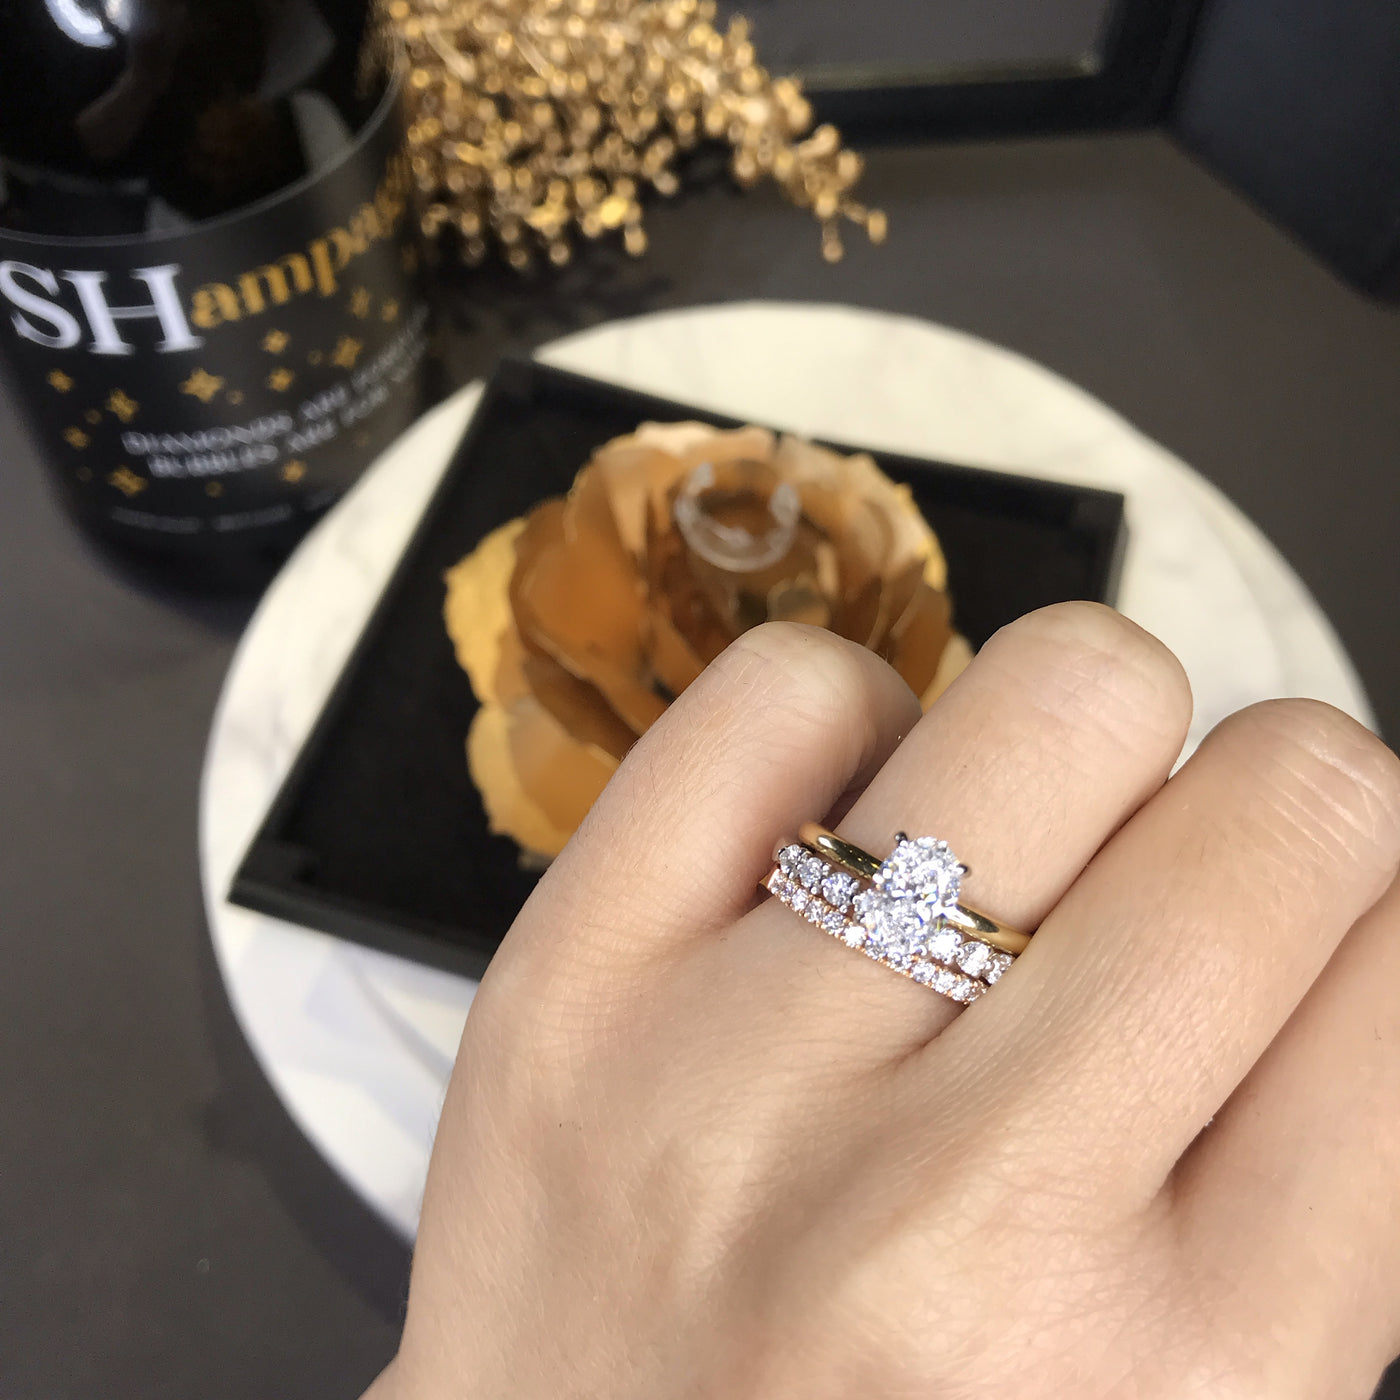 How to Select a Wedding Band that Beautifully Complements your Engagement Ring